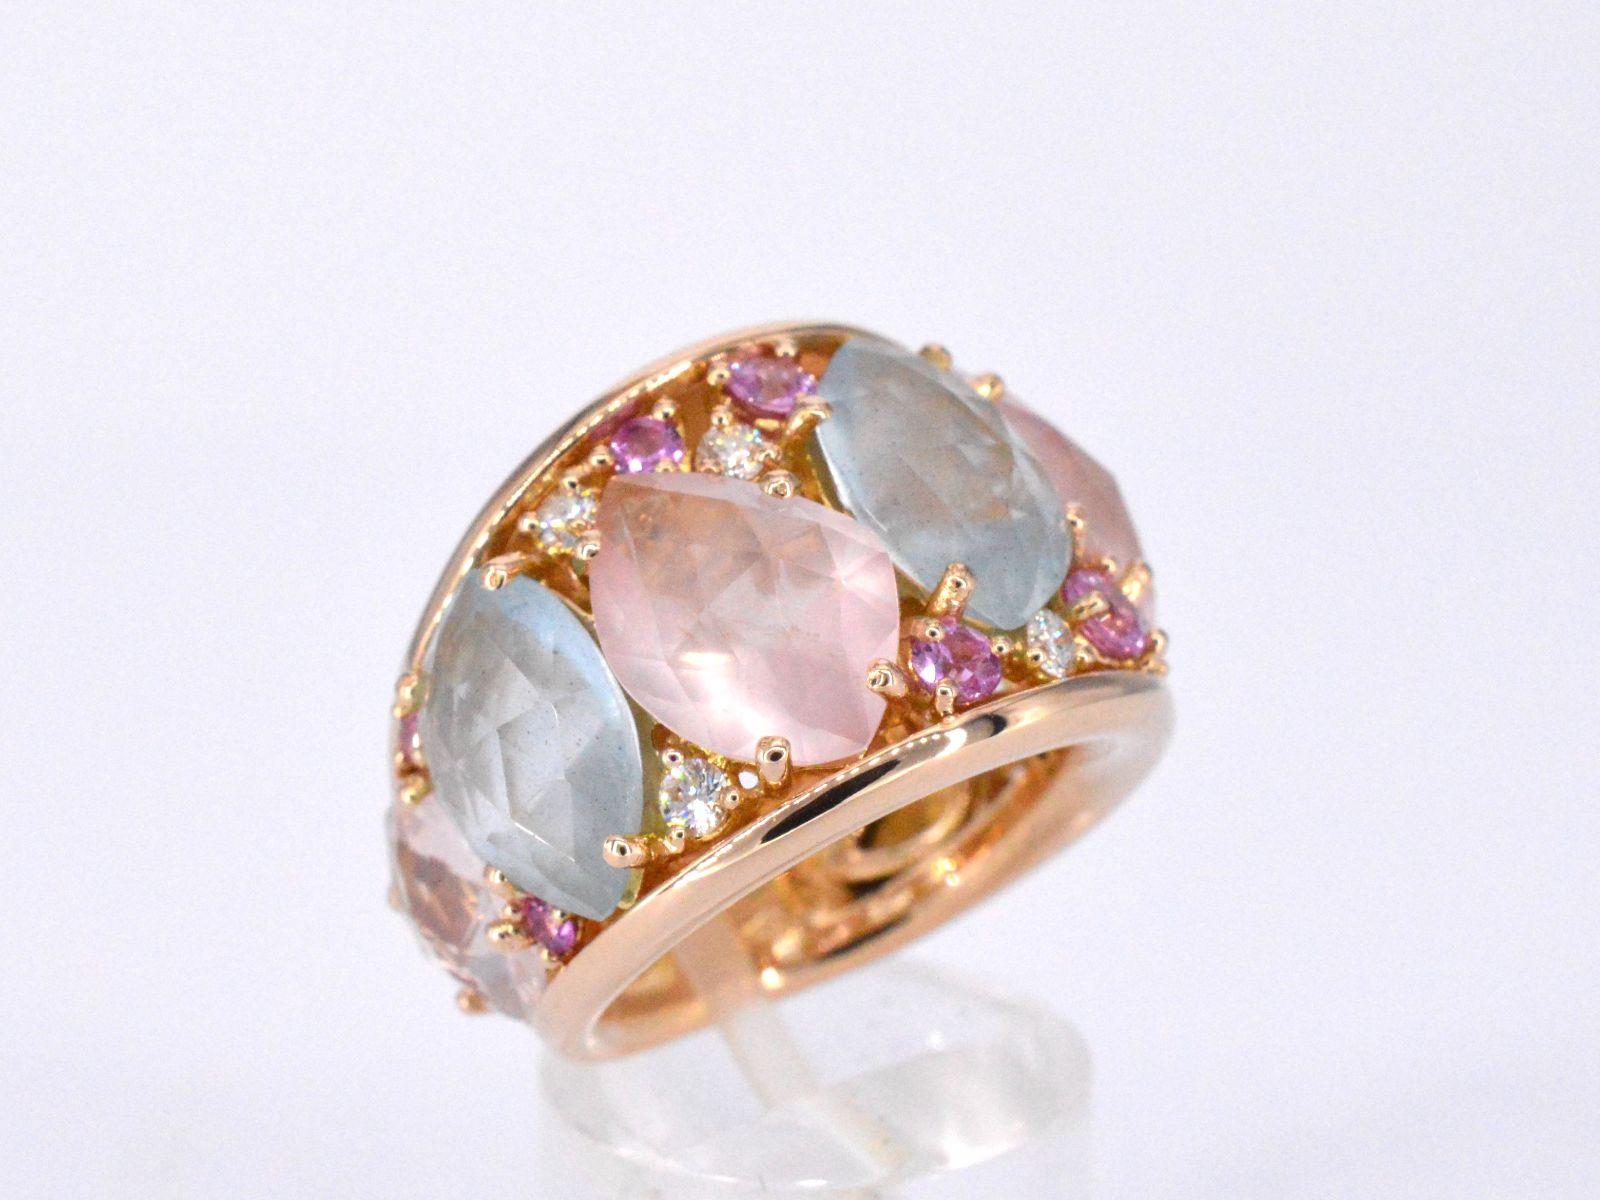 Brilliant Cut Crivelli - Rose gold ring with baroque gemstones. For Sale